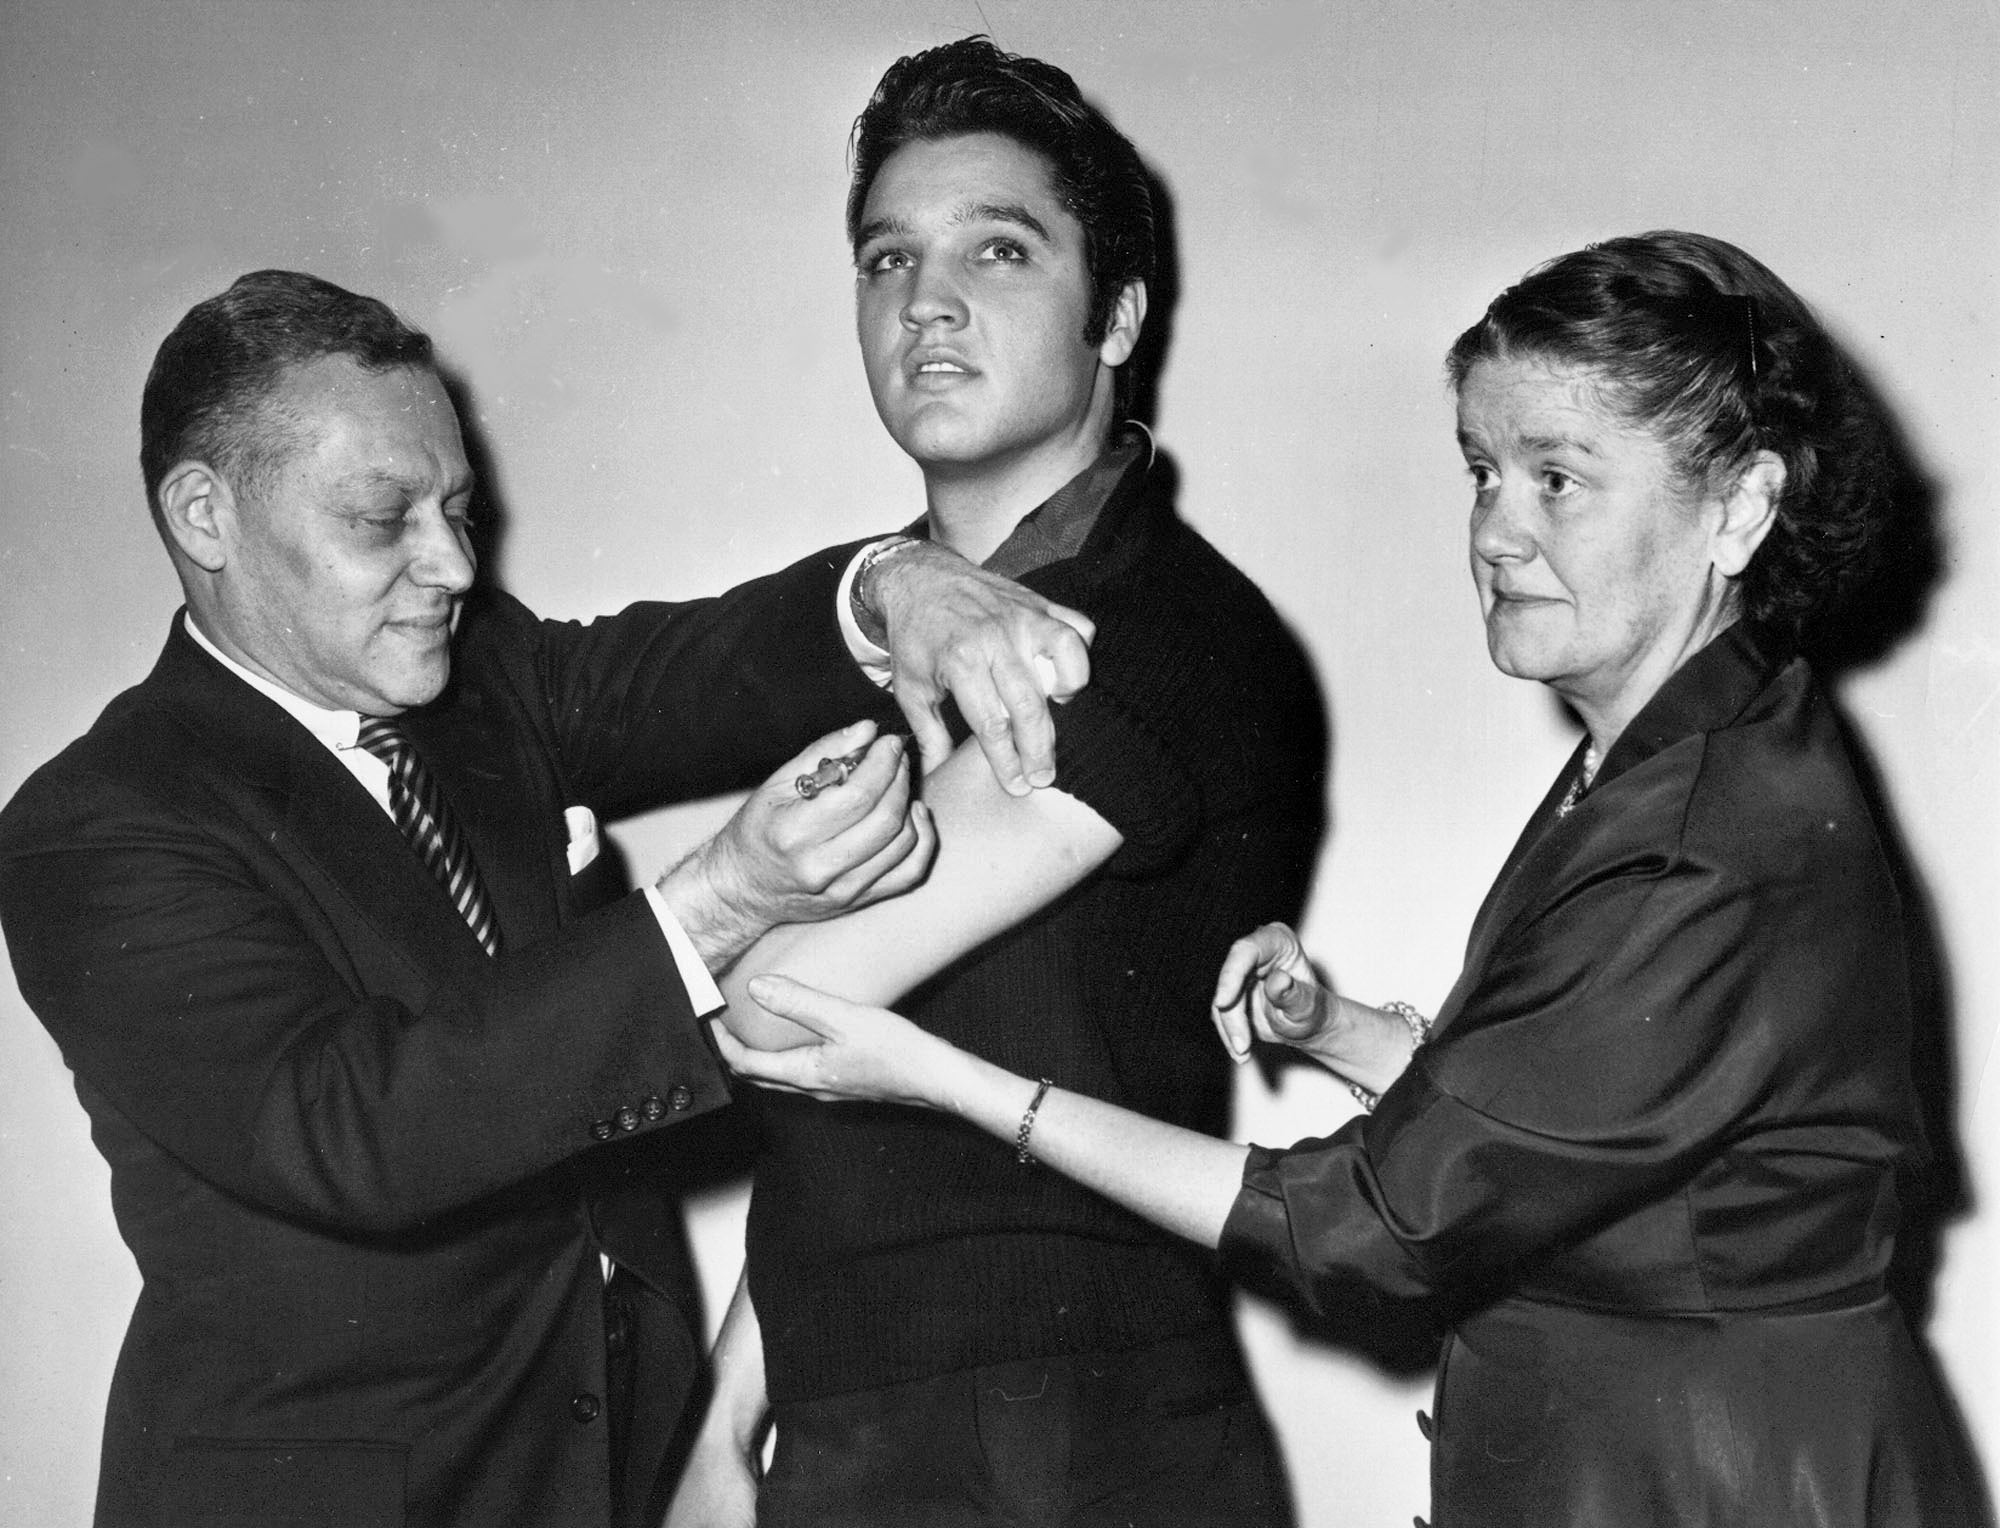 Elvis Presley, then 21 years old, gets a polio vaccine